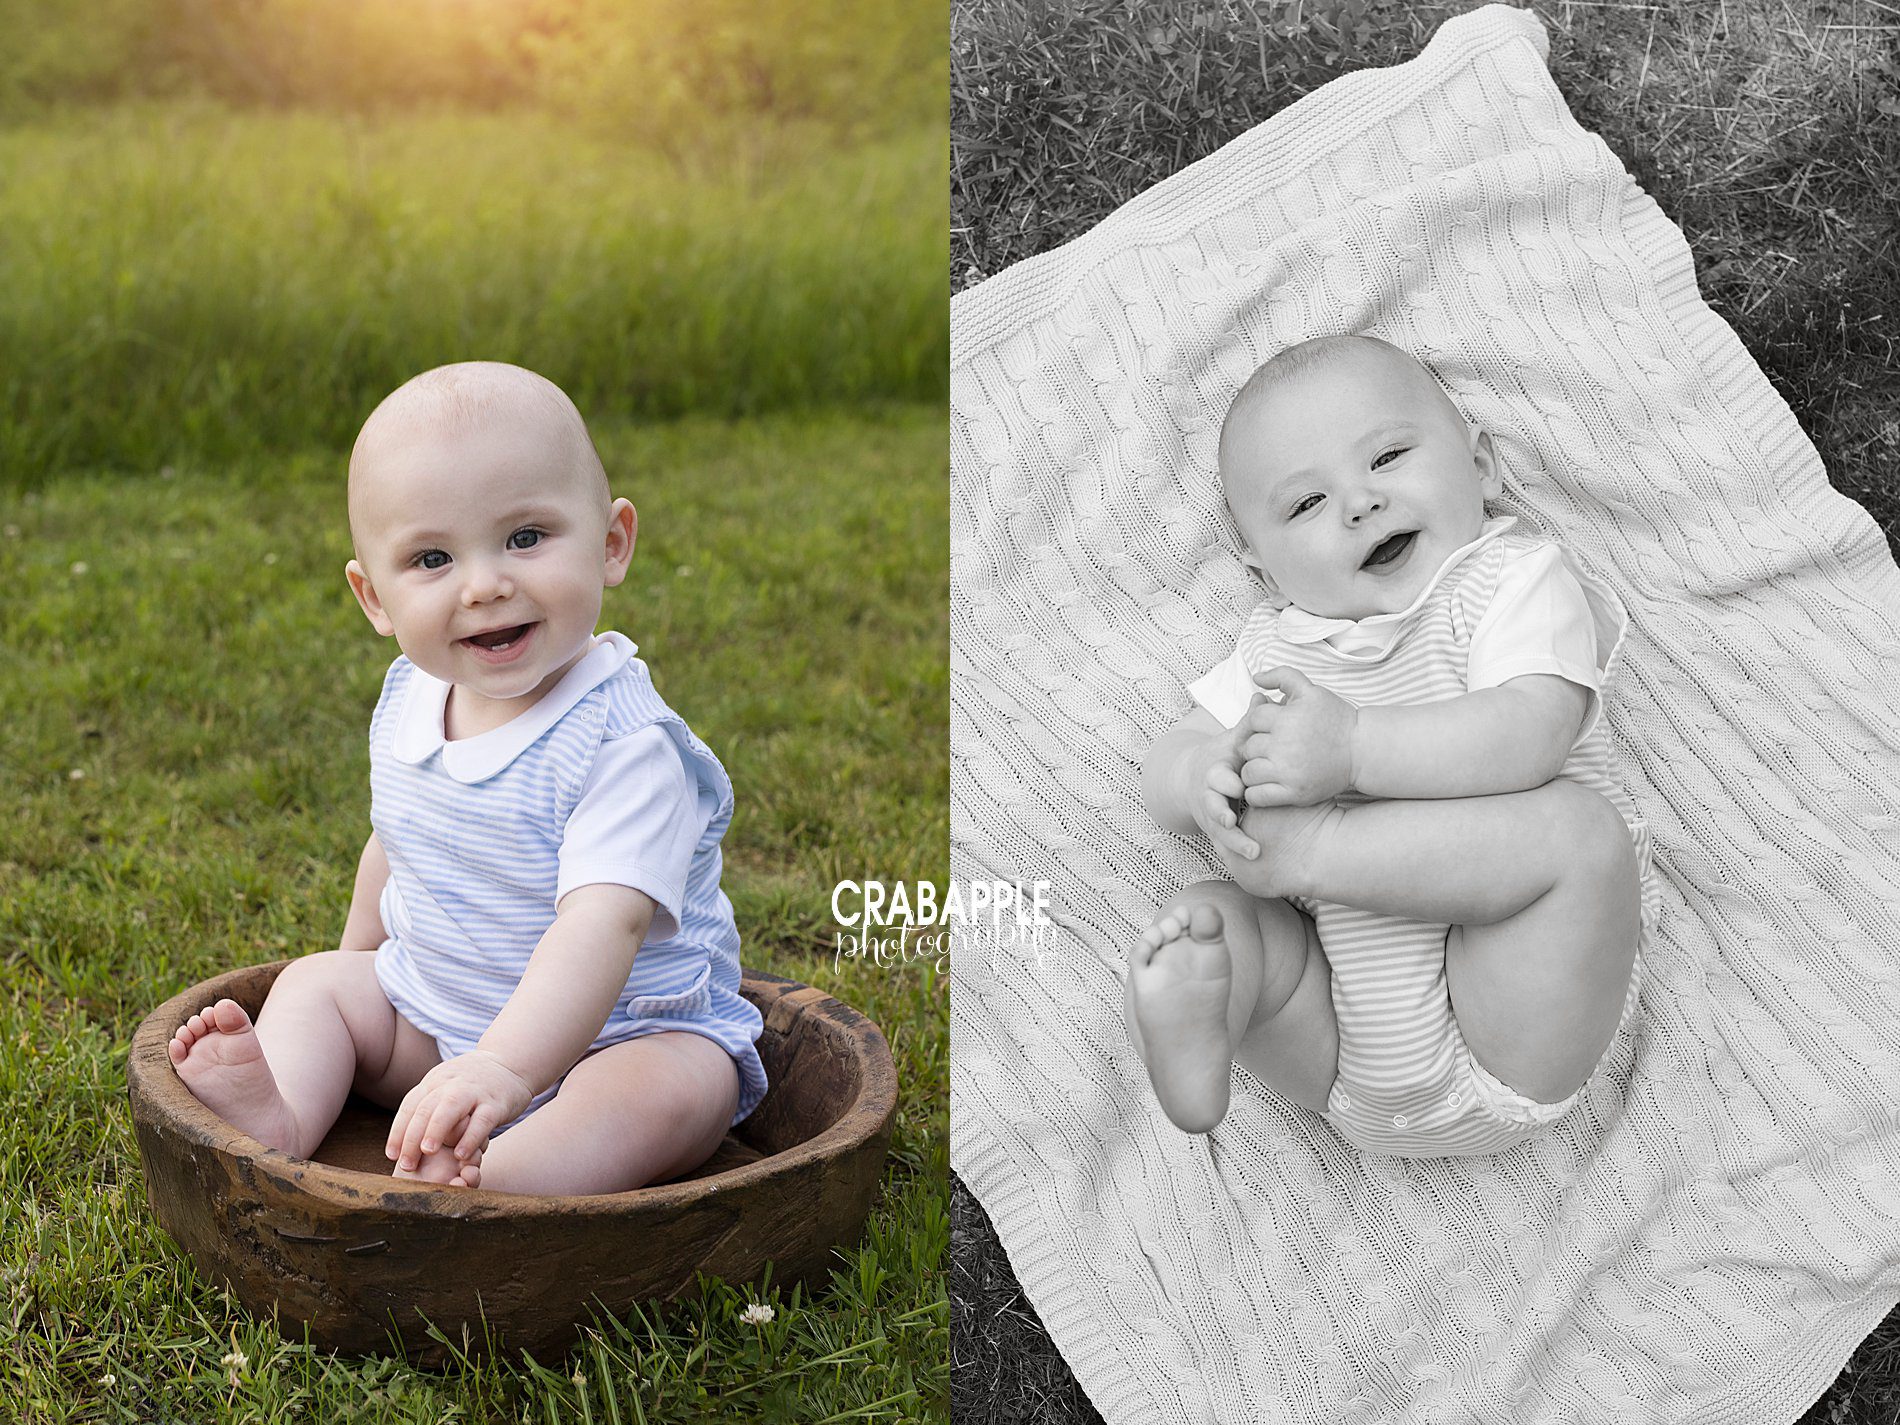 8 month old photo ideas for babies